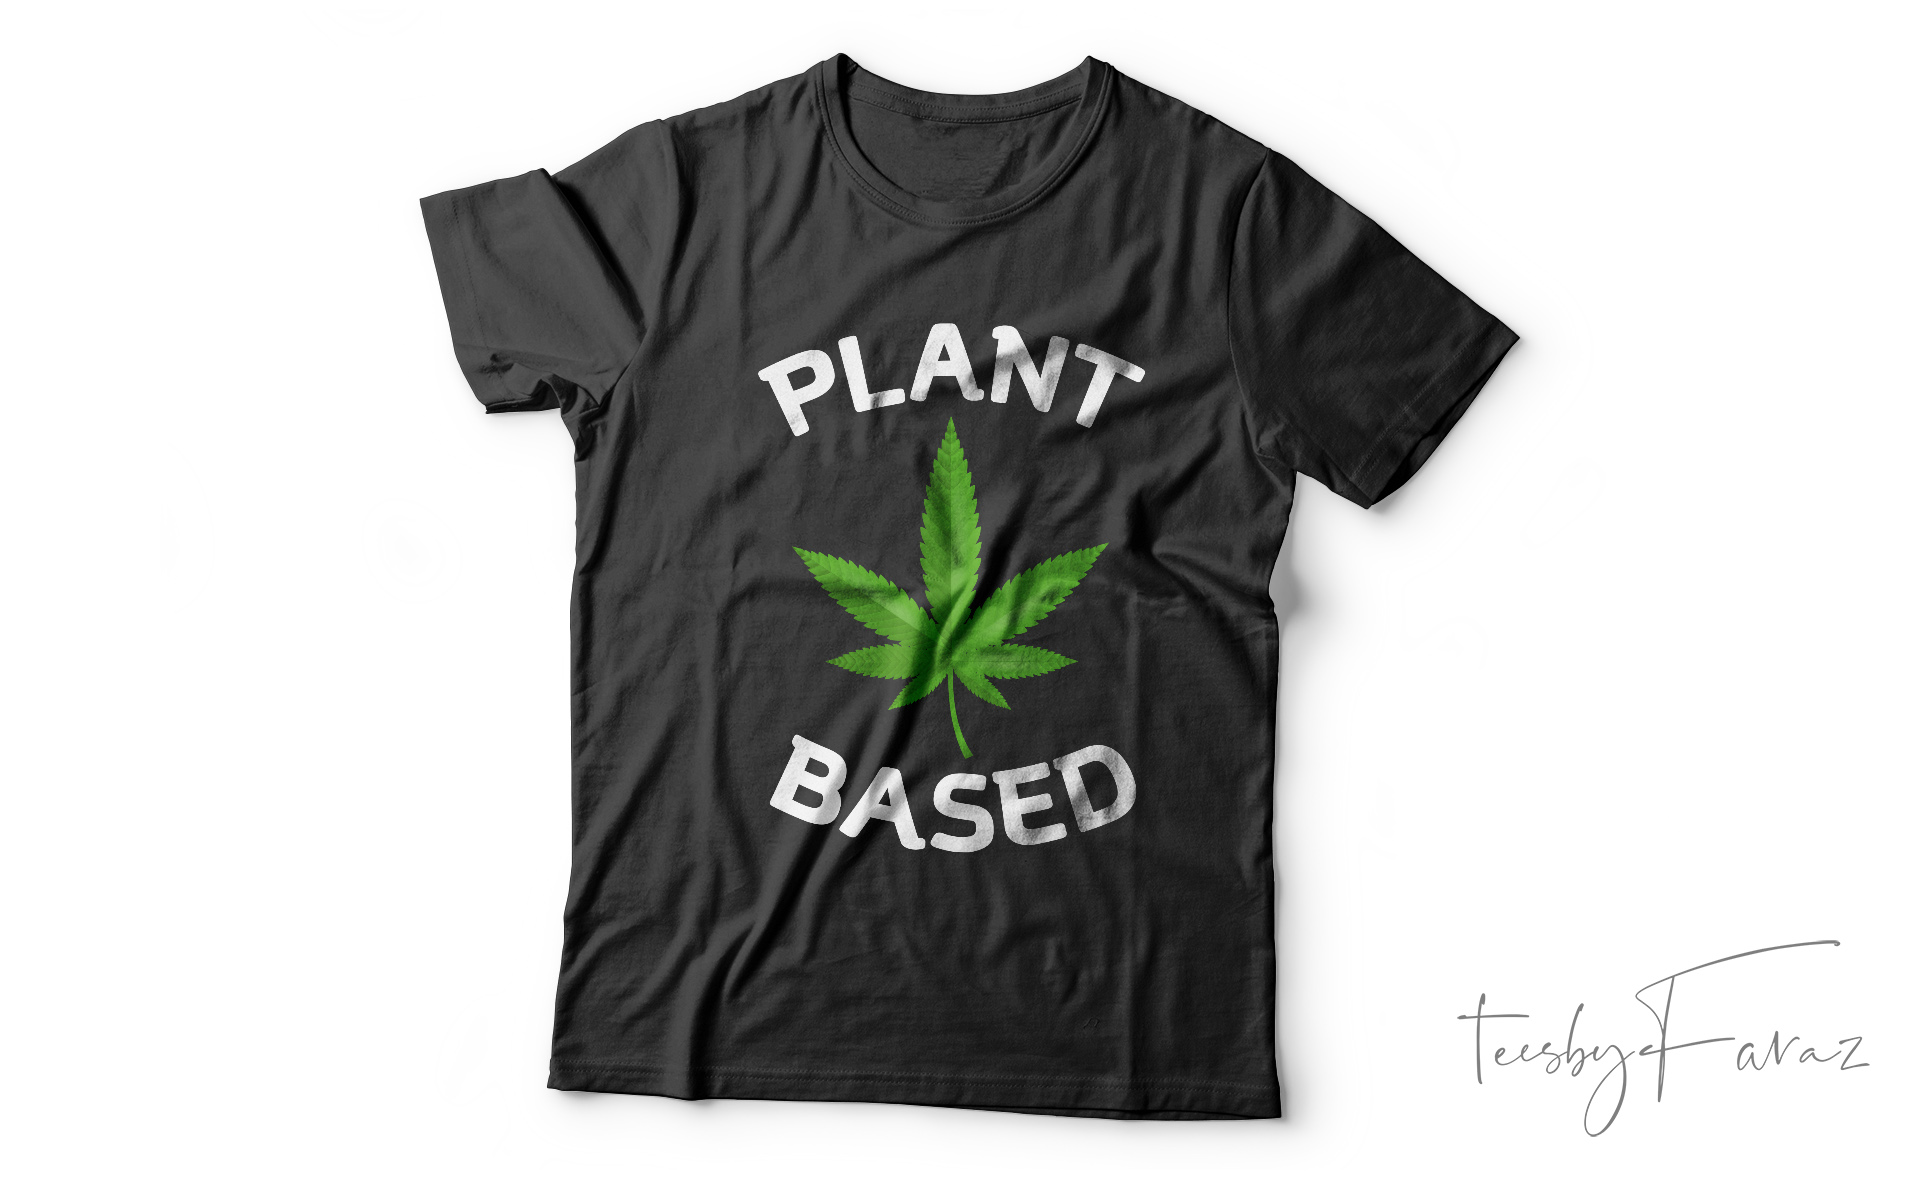 Plant Based Weed Art t shirt design | Graphical t shirt design for sale ...